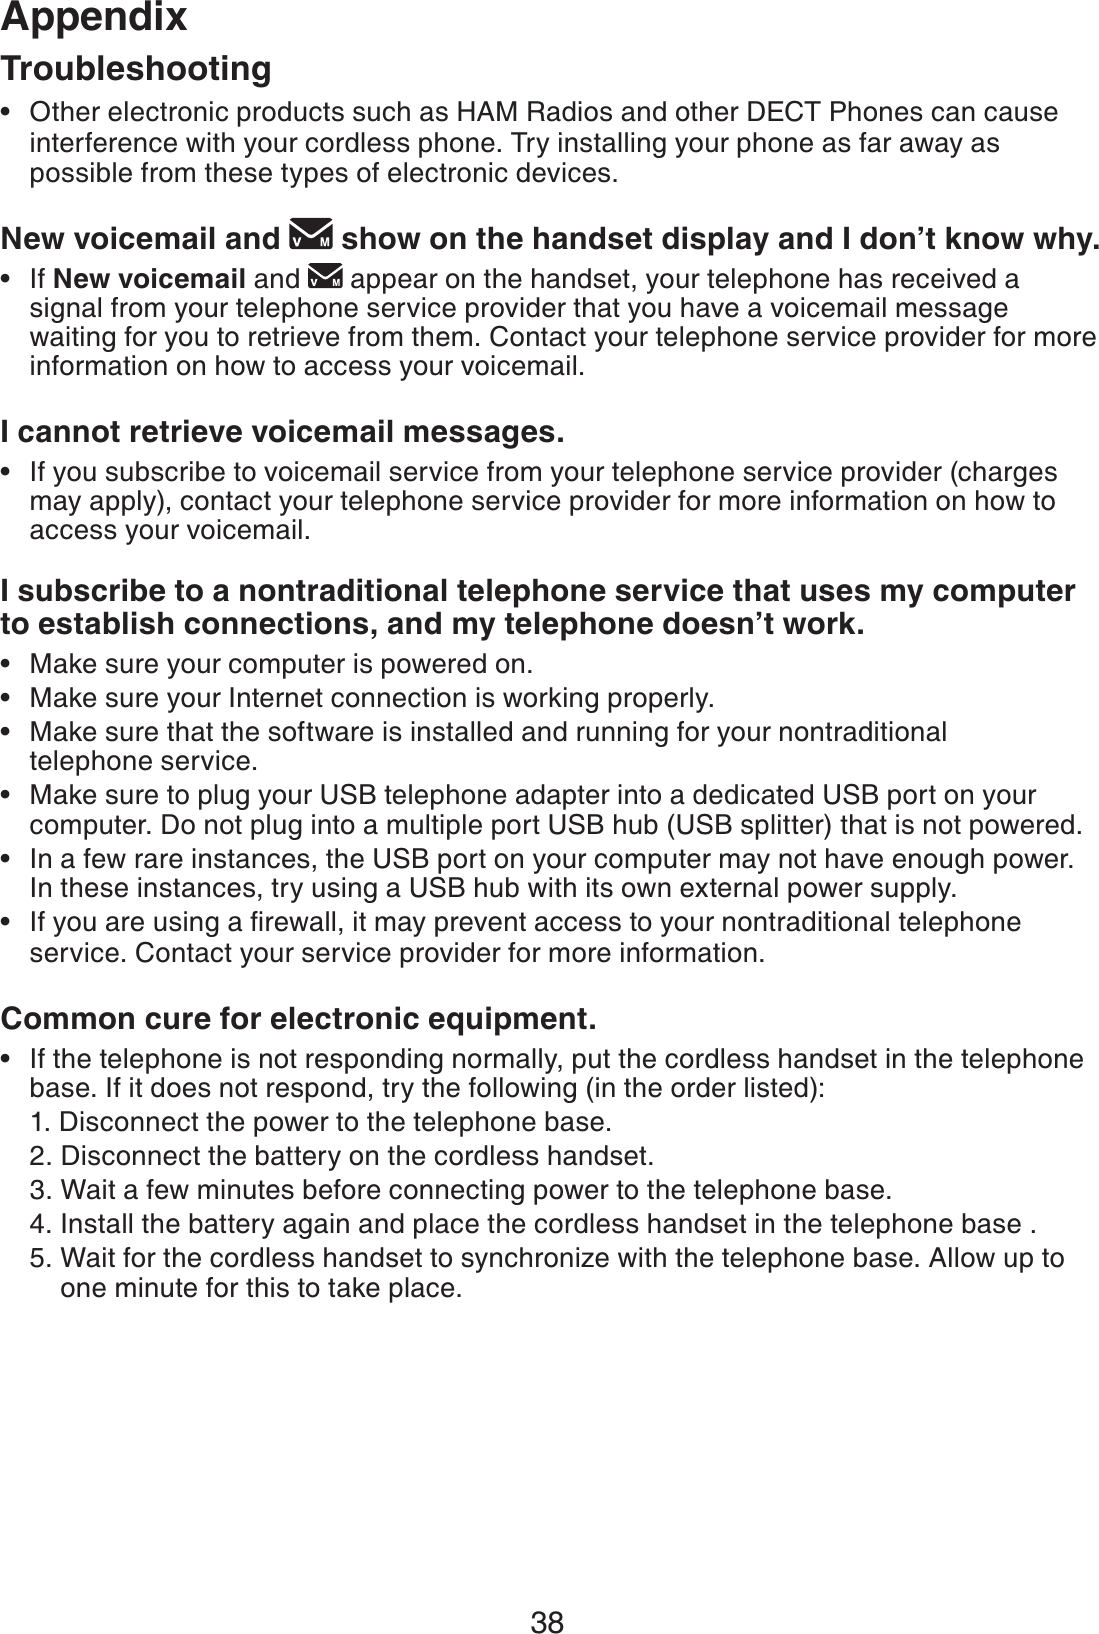 38AppendixOther electronic products such as HAM Radios and other DECT Phones can cause interference with your cordless phone. Try installing your phone as far away as possible from these types of electronic devices.New voicemail and   show on the handset display and I don’t know why.If New voicemail and  appear on the handset, your telephone has received a signal from your telephone service provider that you have a voicemail message waiting for you to retrieve from them. Contact your telephone service provider for more information on how to access your voicemail. I cannot retrieve voicemail messages.If you subscribe to voicemail service from your telephone service provider (charges may apply), contact your telephone service provider for more information on how to access your voicemail.I subscribe to a nontraditional telephone service that uses my computer to establish connections, and my telephone doesn’t work.Make sure your computer is powered on.Make sure your Internet connection is working properly.Make sure that the software is installed and running for your nontraditional telephone service. Make sure to plug your USB telephone adapter into a dedicated USB port on your computer. Do not plug into a multiple port USB hub (USB splitter) that is not powered.In a few rare instances, the USB port on your computer may not have enough power. In these instances, try using a USB hub with its own external power supply.+H[QWCTGWUKPICſTGYCNNKVOC[RTGXGPVCEEGUUVQ[QWTPQPVTCFKVKQPCNVGNGRJQPGservice. Contact your service provider for more information.Common cure for electronic equipment.If the telephone is not responding normally, put the cordless handset in the telephone base. If it does not respond, try the following (in the order listed):1. Disconnect the power to the telephone base.2. Disconnect the battery on the cordless handset.3. Wait a few minutes before connecting power to the telephone base.4. Install the battery again and place the cordless handset in the telephone base .5. Wait for the cordless handset to synchronize with the telephone base. Allow up to     one minute for this to take place.••••••••••Troubleshooting